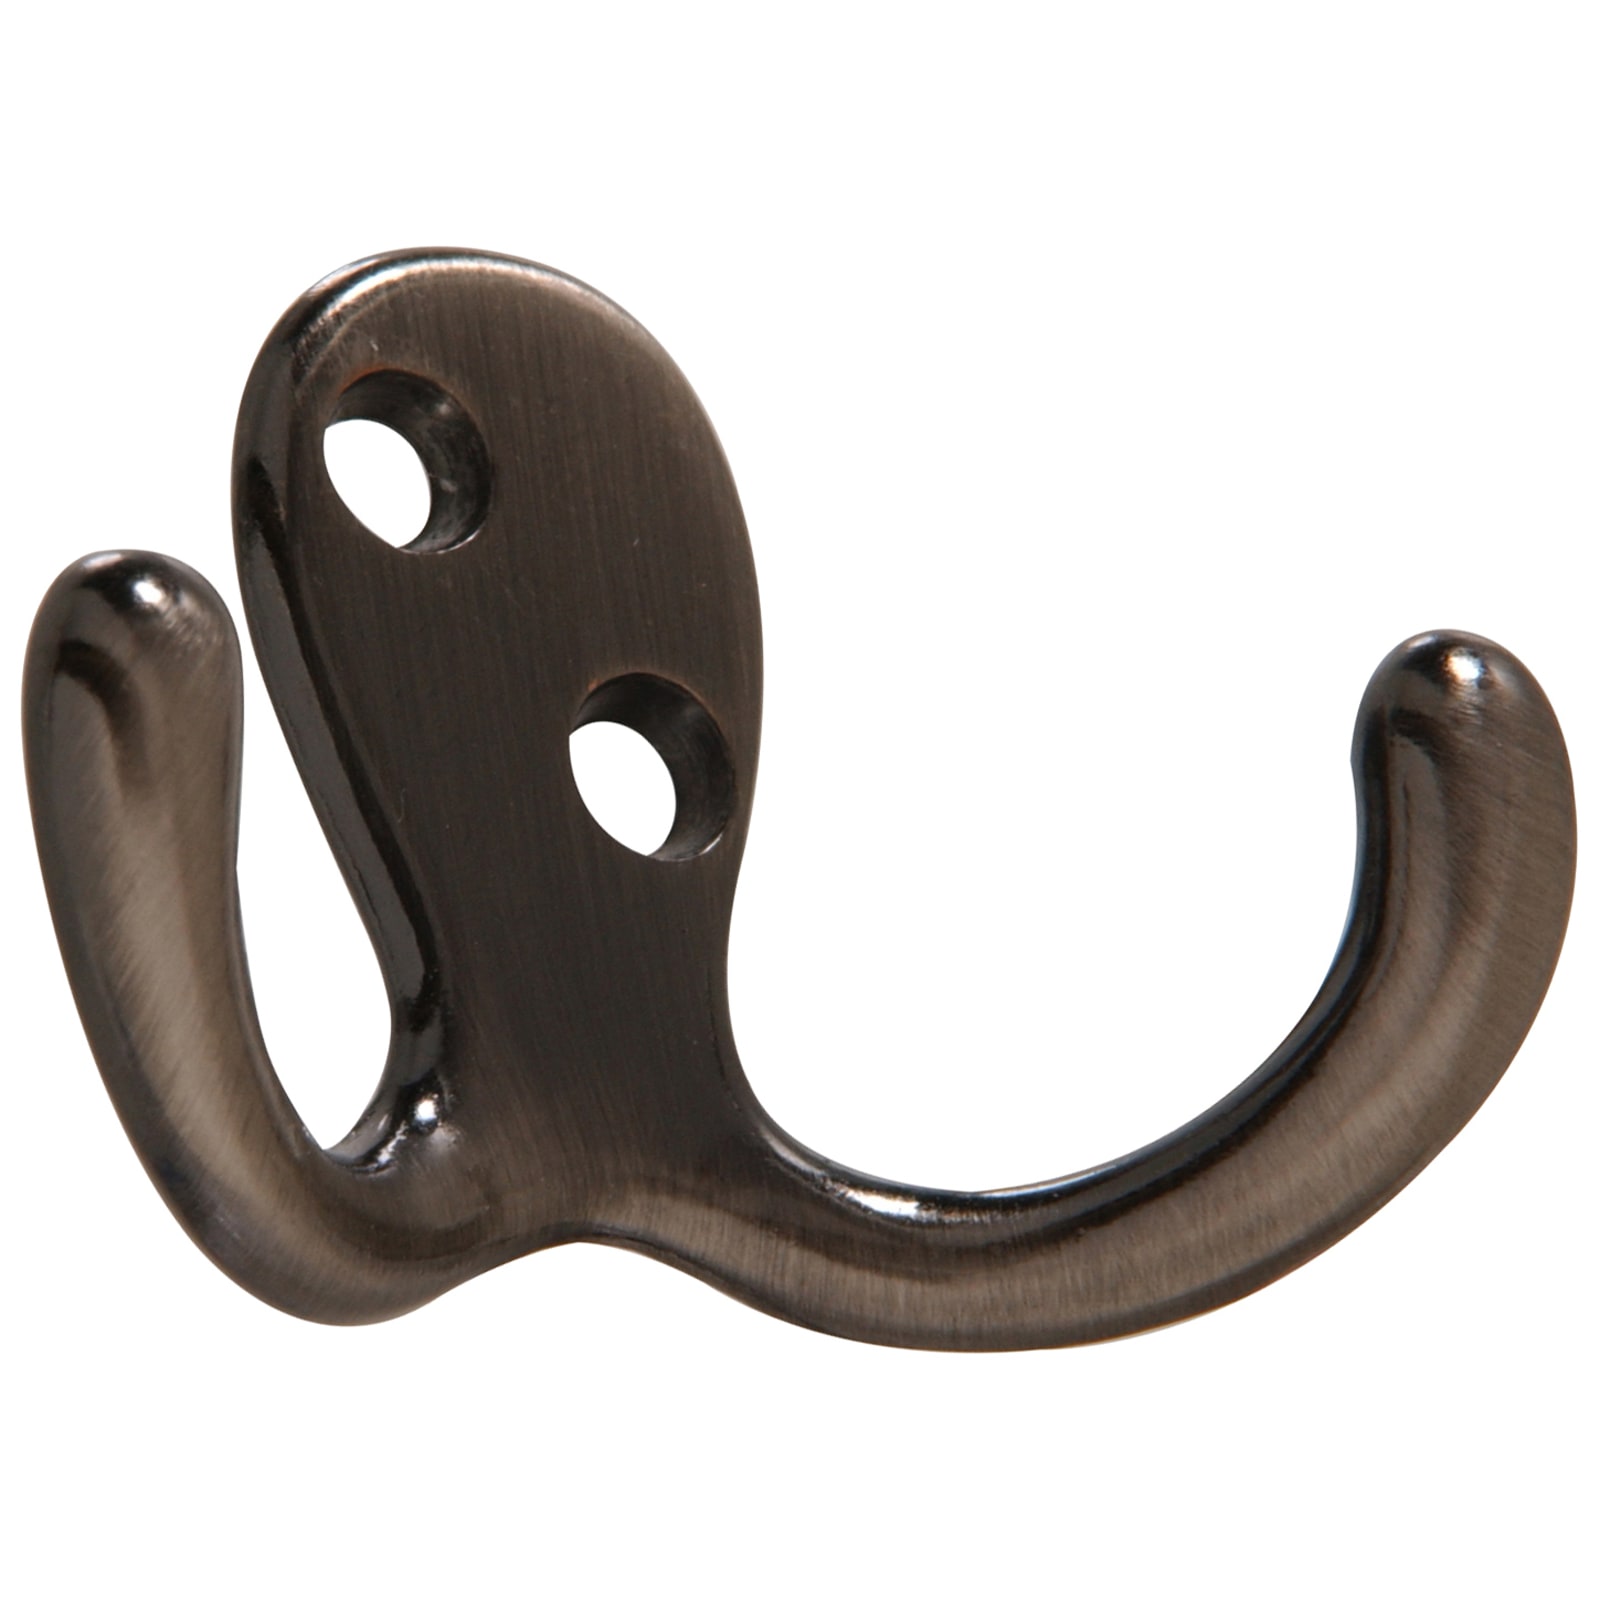 Hardware Essentials 852293 Double Clothes Hooks Pewter -2 Pack